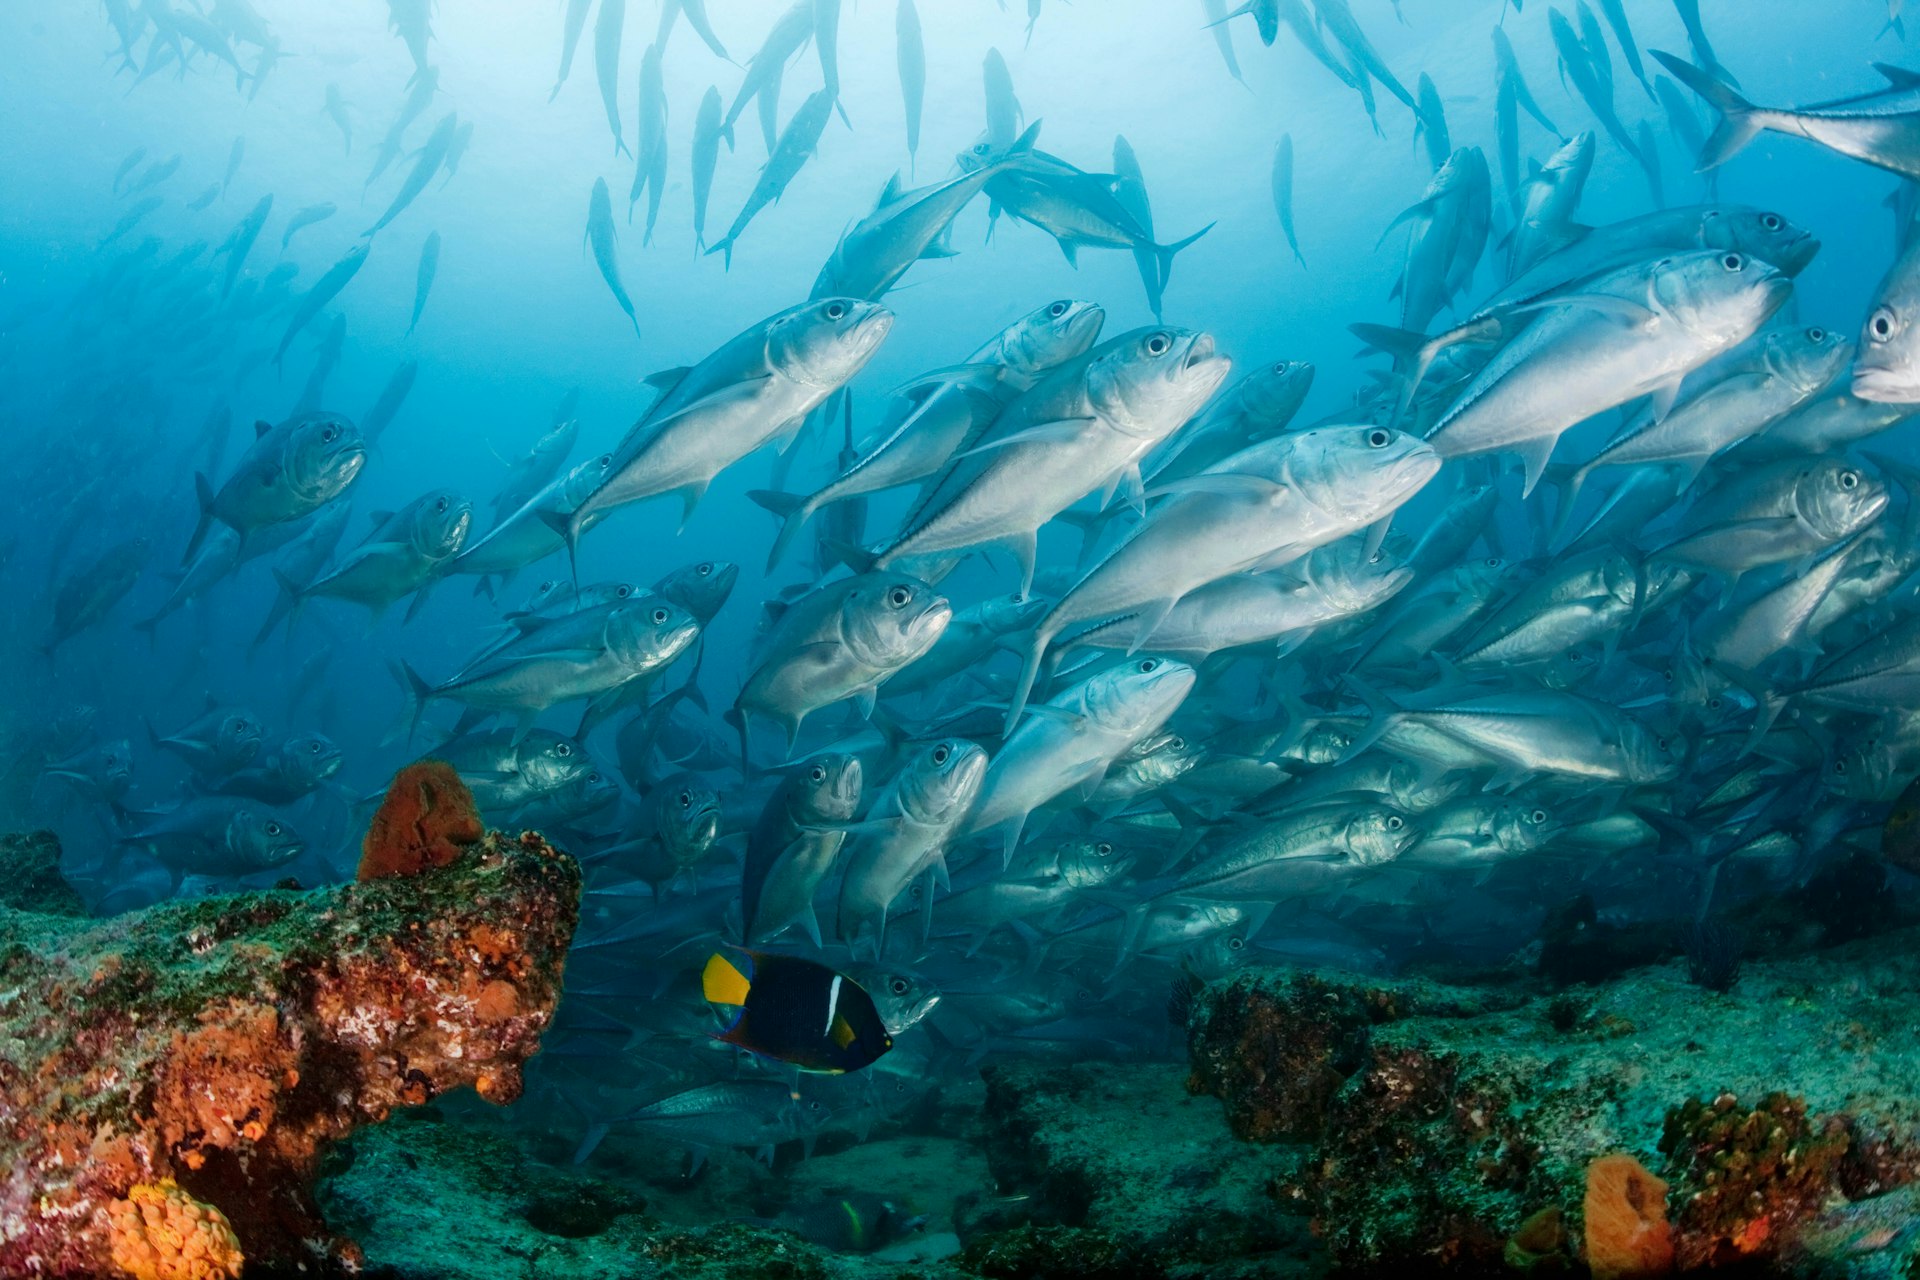 Swim the fishes in the Cabo Pulmo National Park. Image by Kip Evans / Design Pics / Getty Images